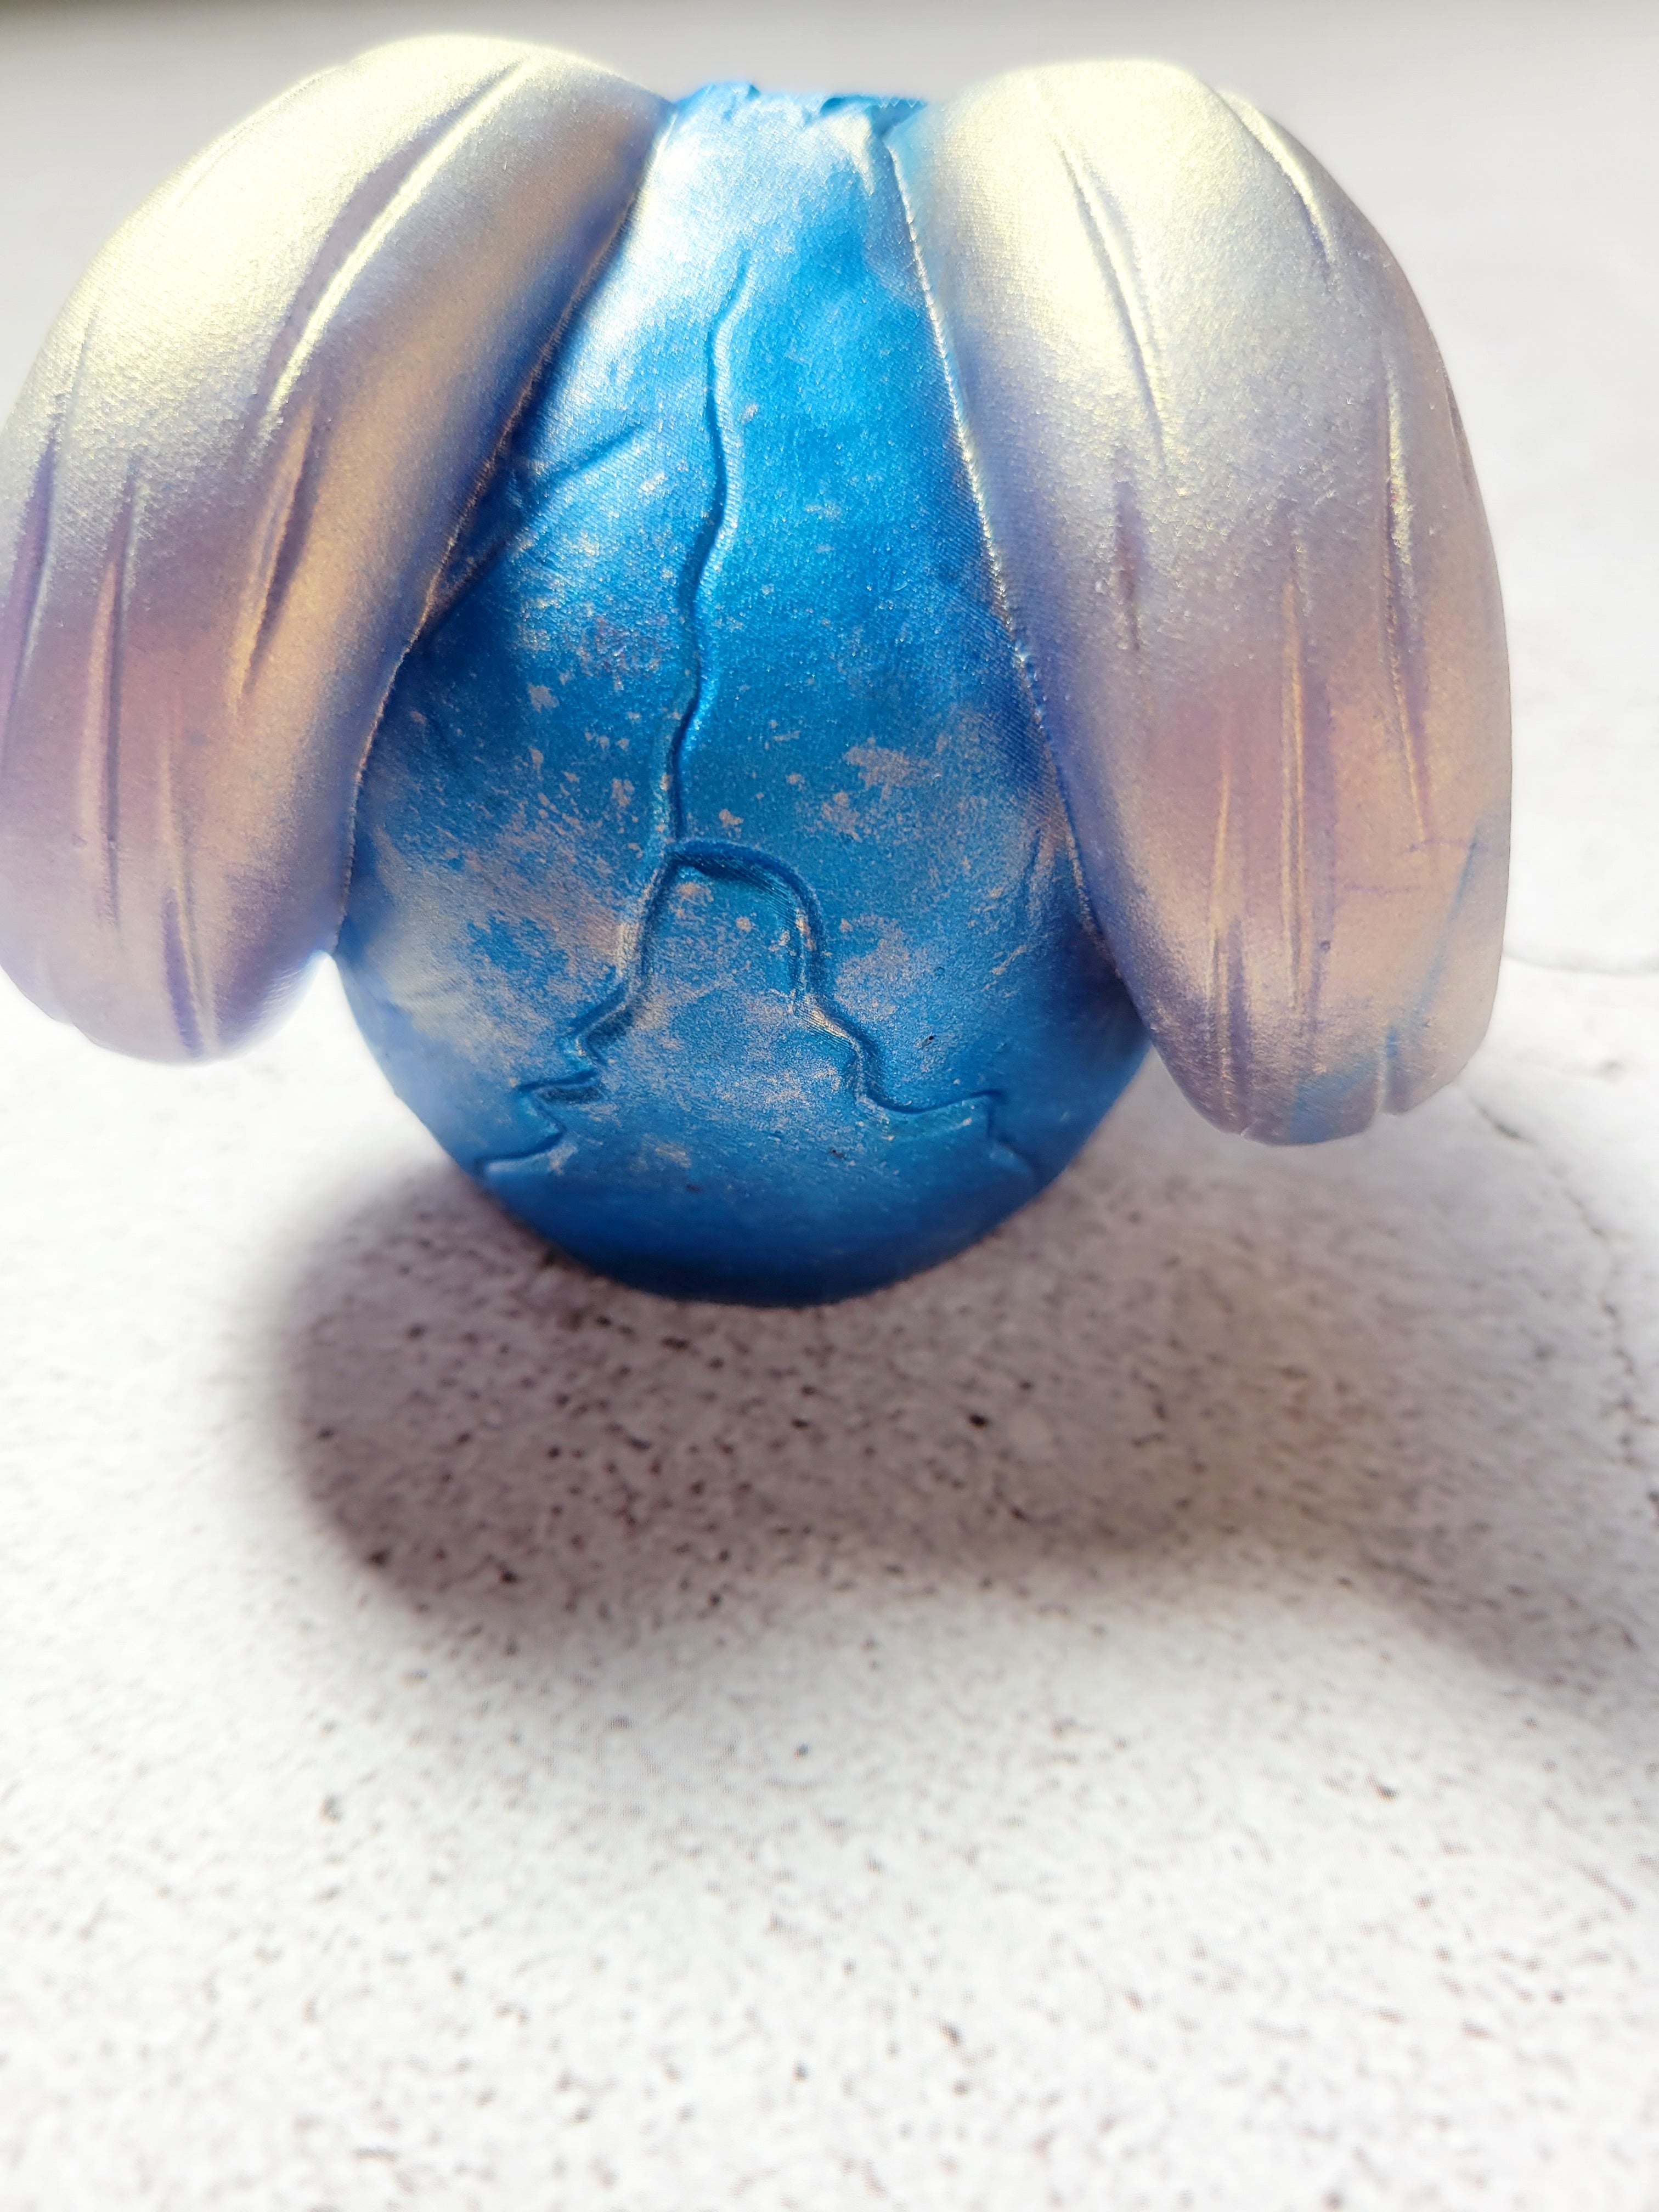 A back view of a skull with curved horns. it's teeth and horns are silver. The skull is blue. There is a textured crack in the back.